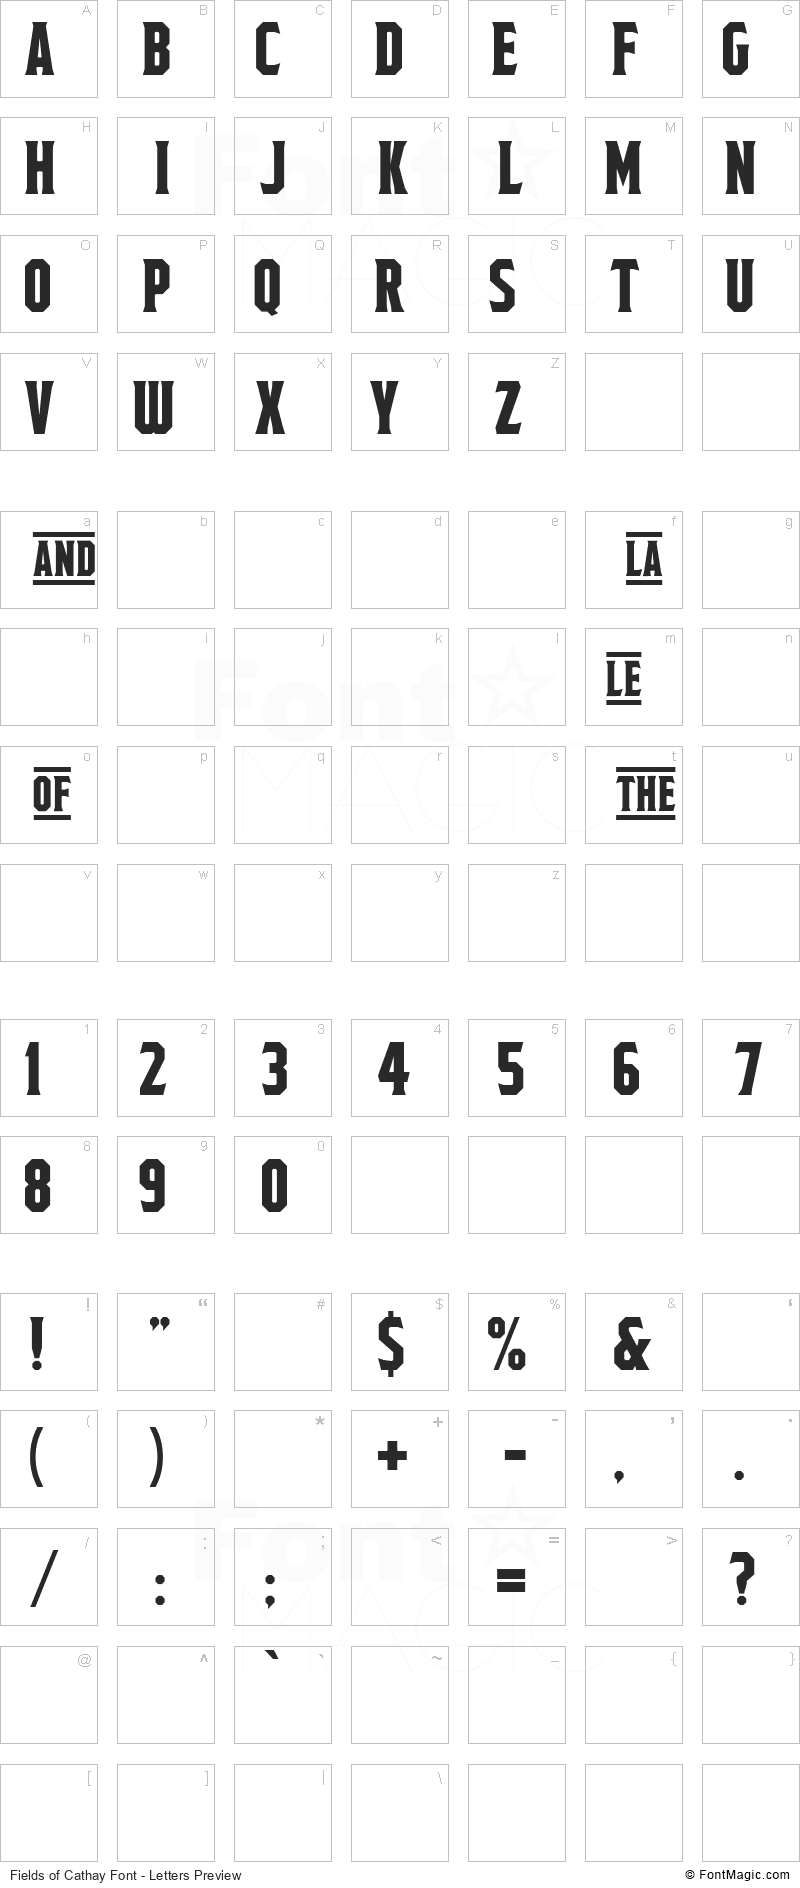 Fields of Cathay Font - All Latters Preview Chart